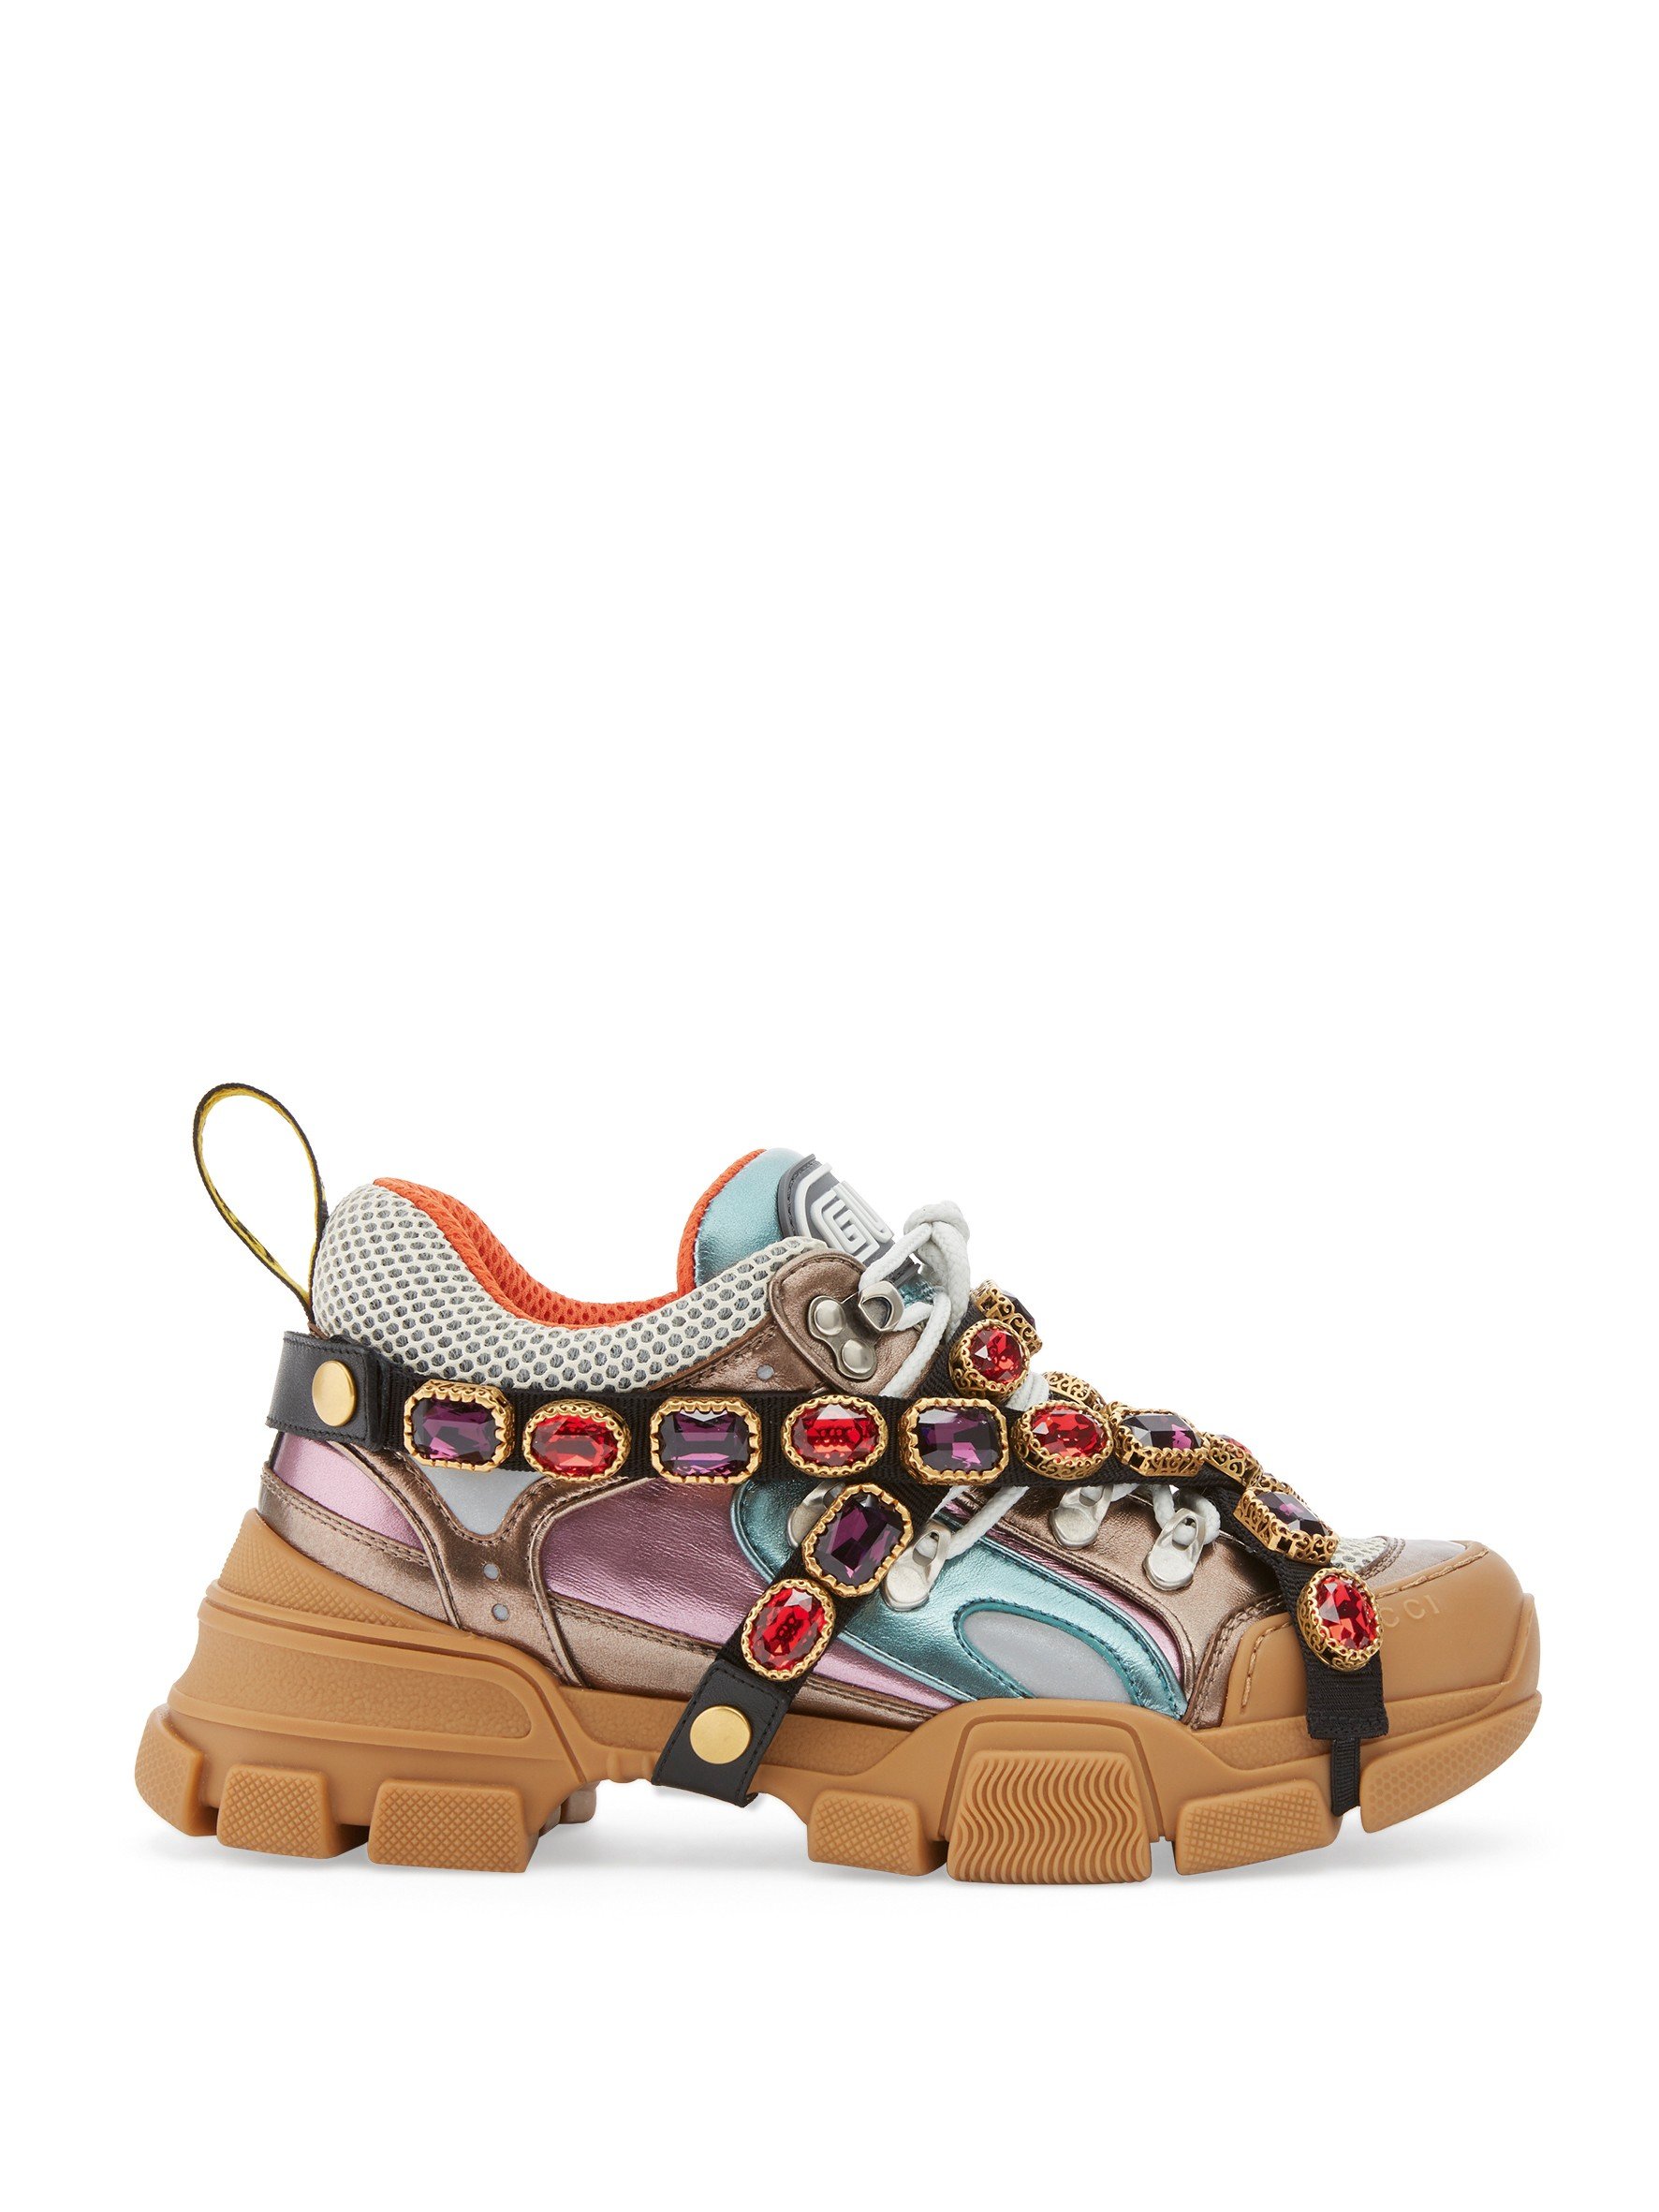 Gucci. Embellished with sparkling crystals on its removable elastic strap, the oversized Flashtrek sneakers from Gucci make a strong fashion statement. The sneakers have a dynamic mix of materials including rubber, suede and technical canvas, HK$12,600